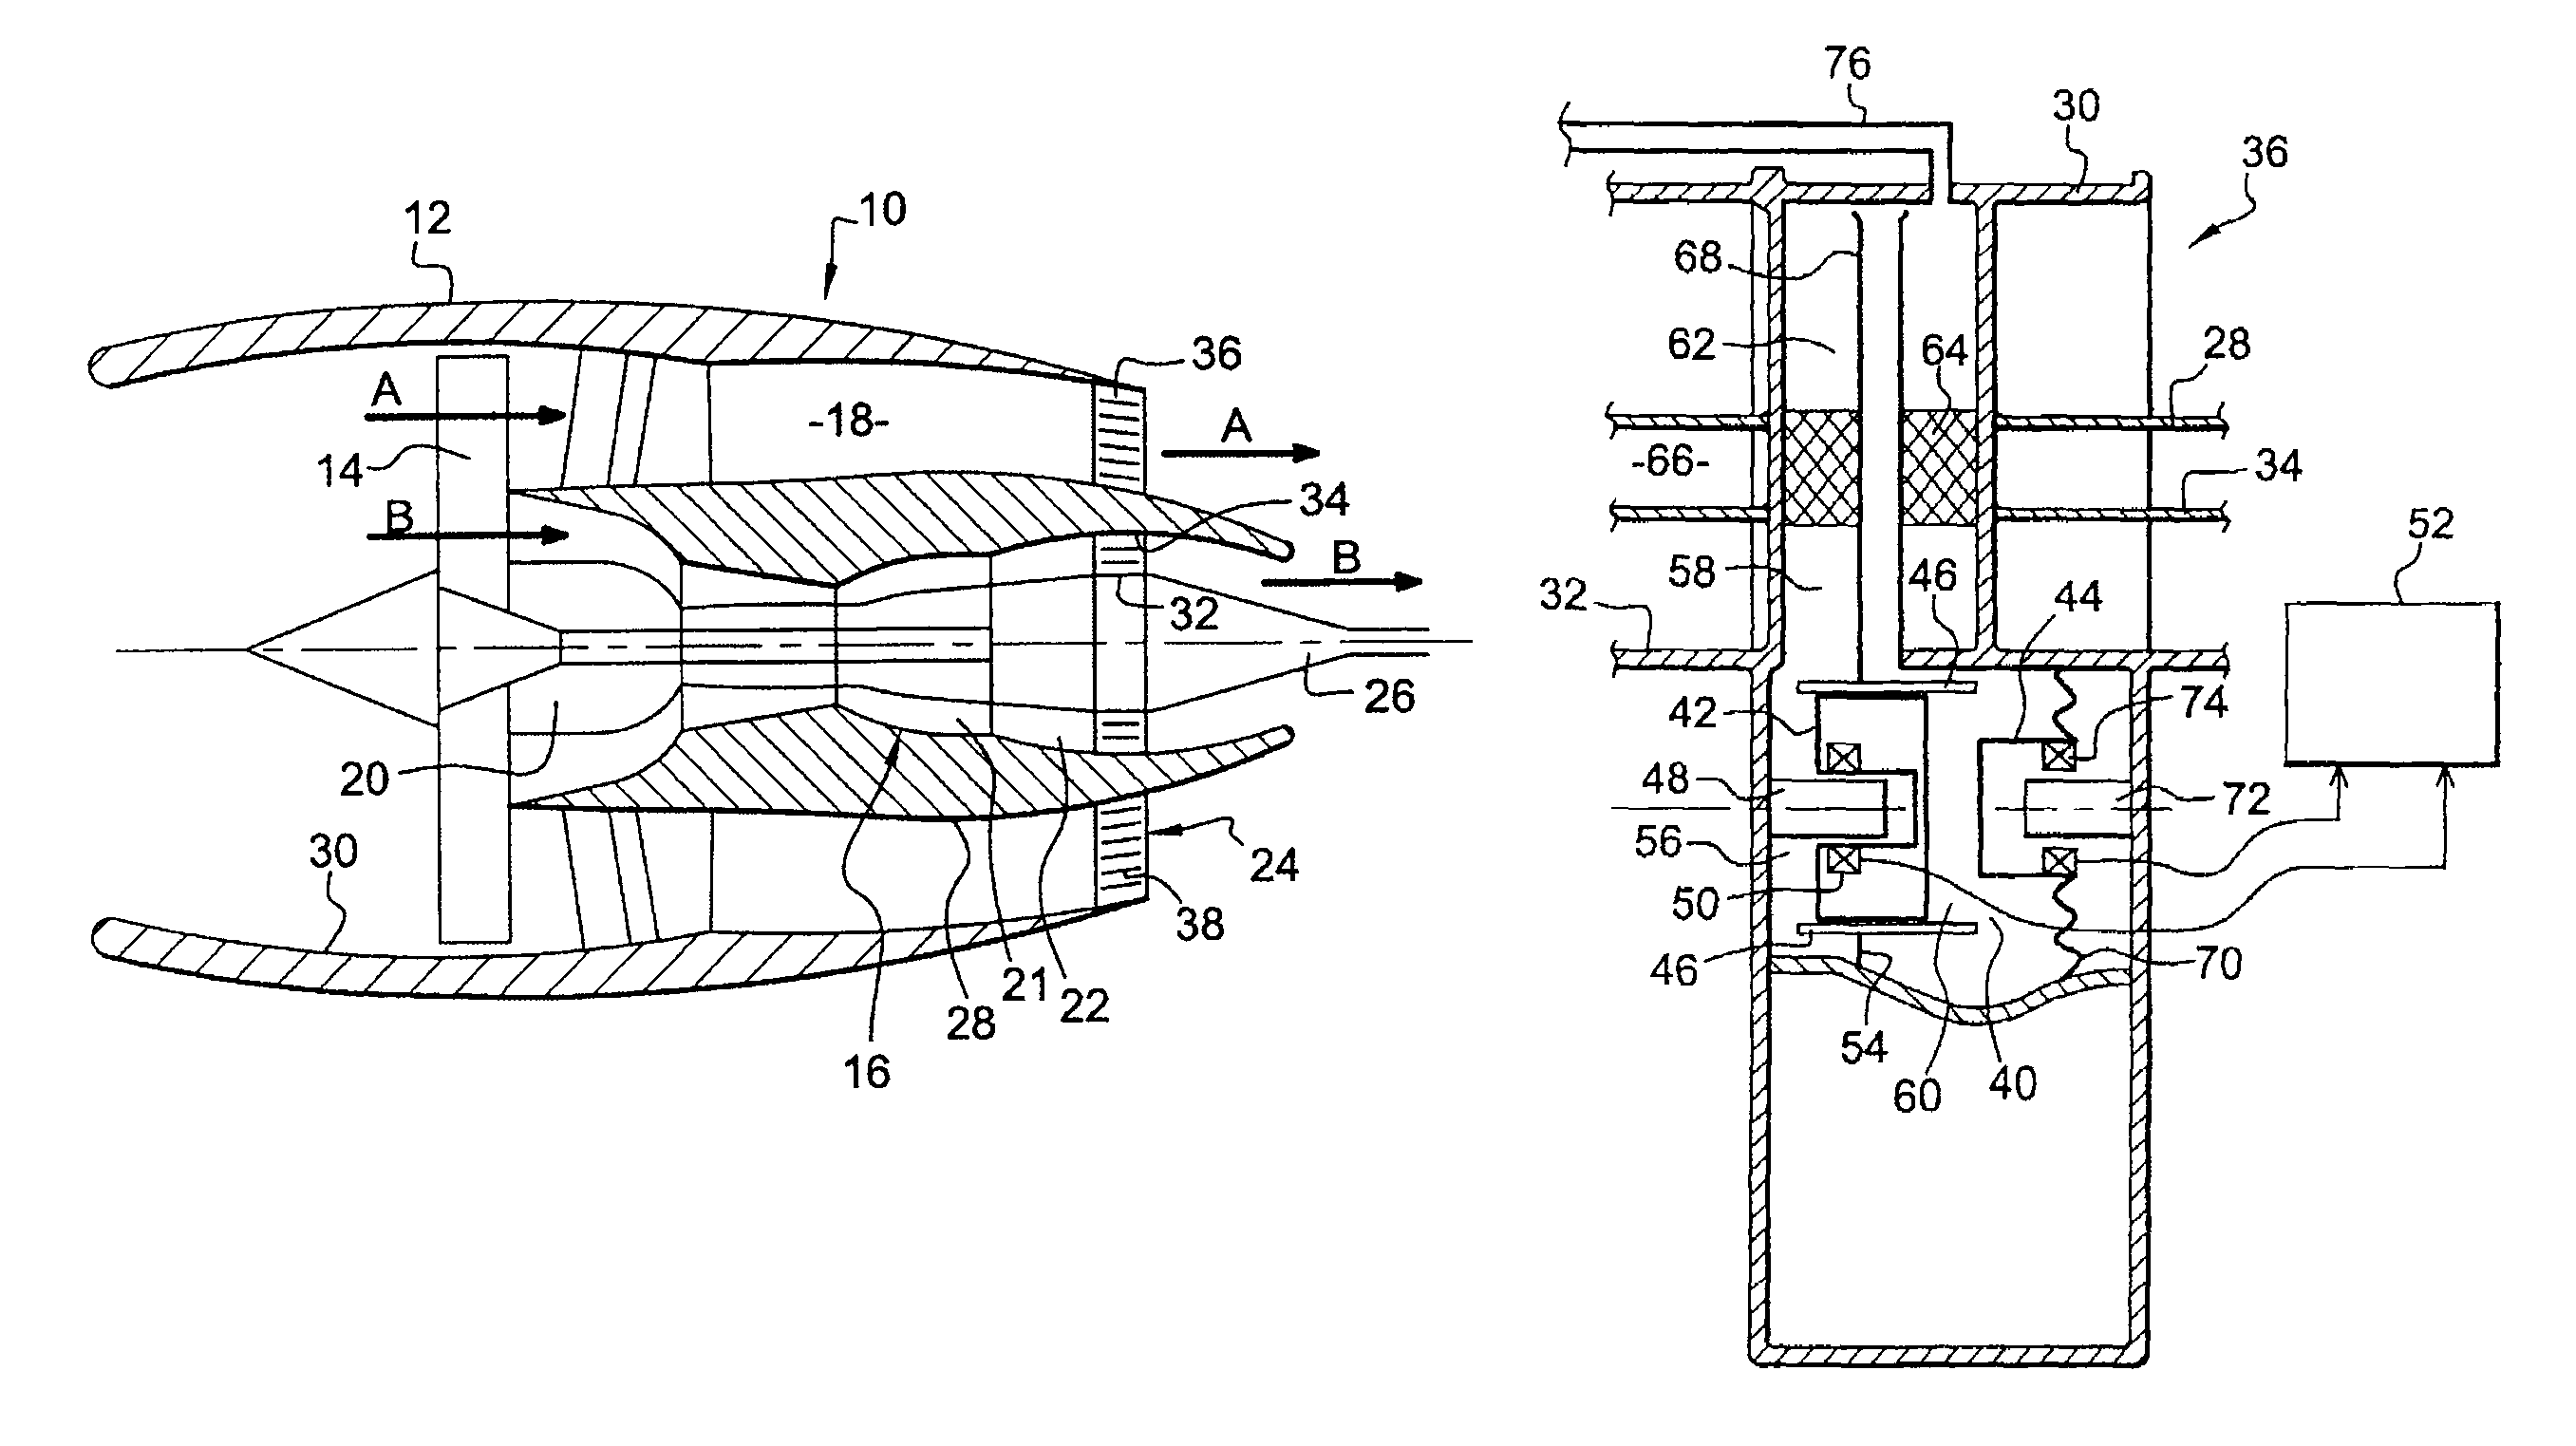 Electricity generation in a turbomachine